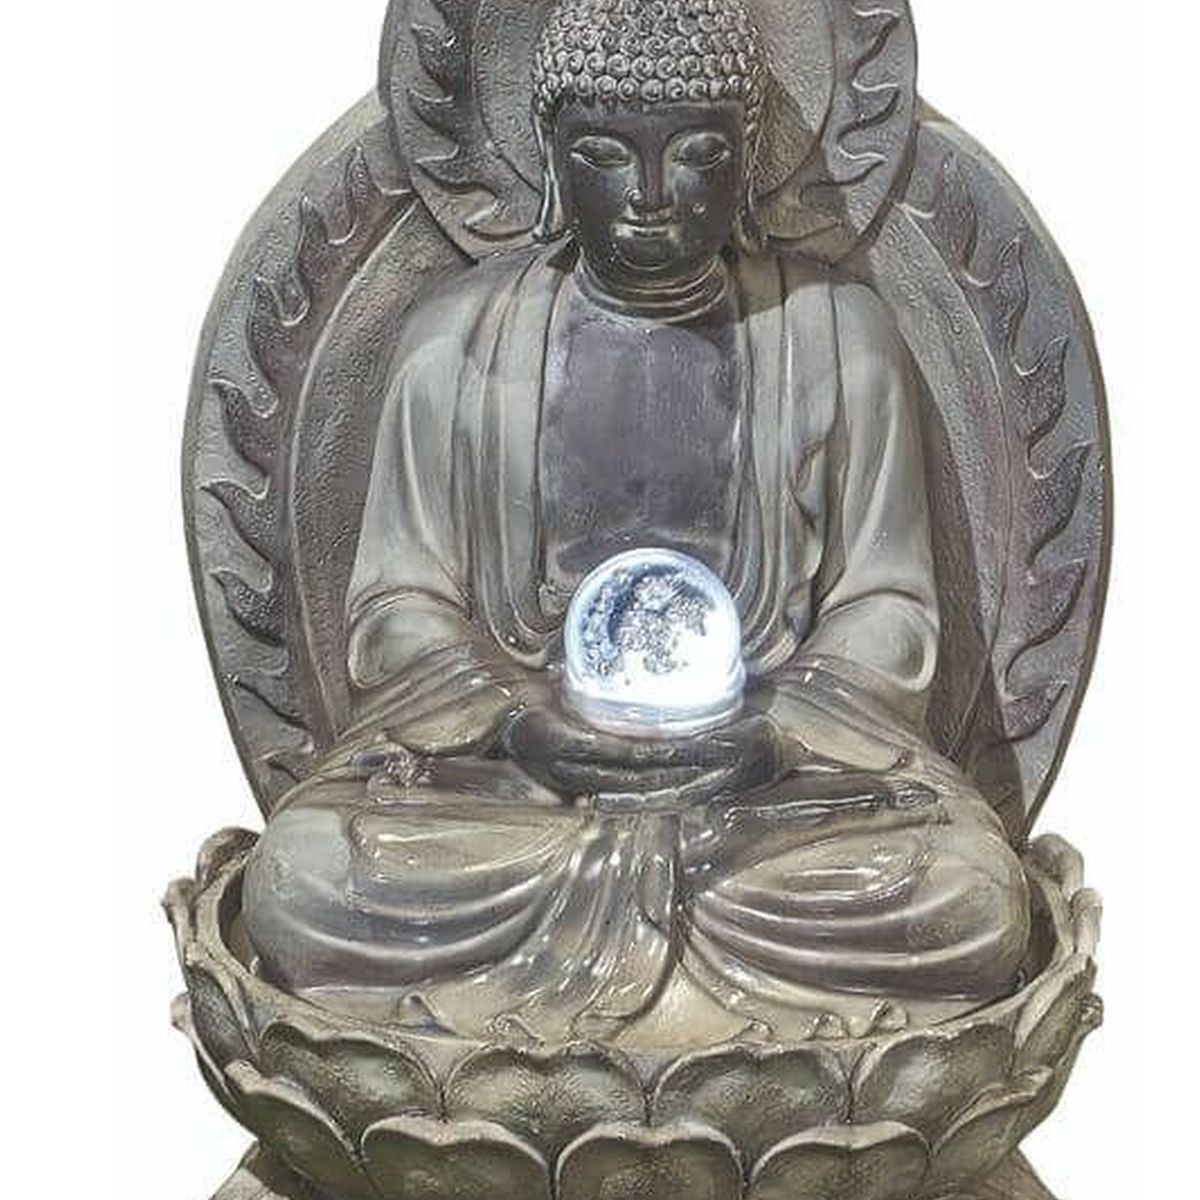 Meditating Buddha Water Feature (with LEDs)